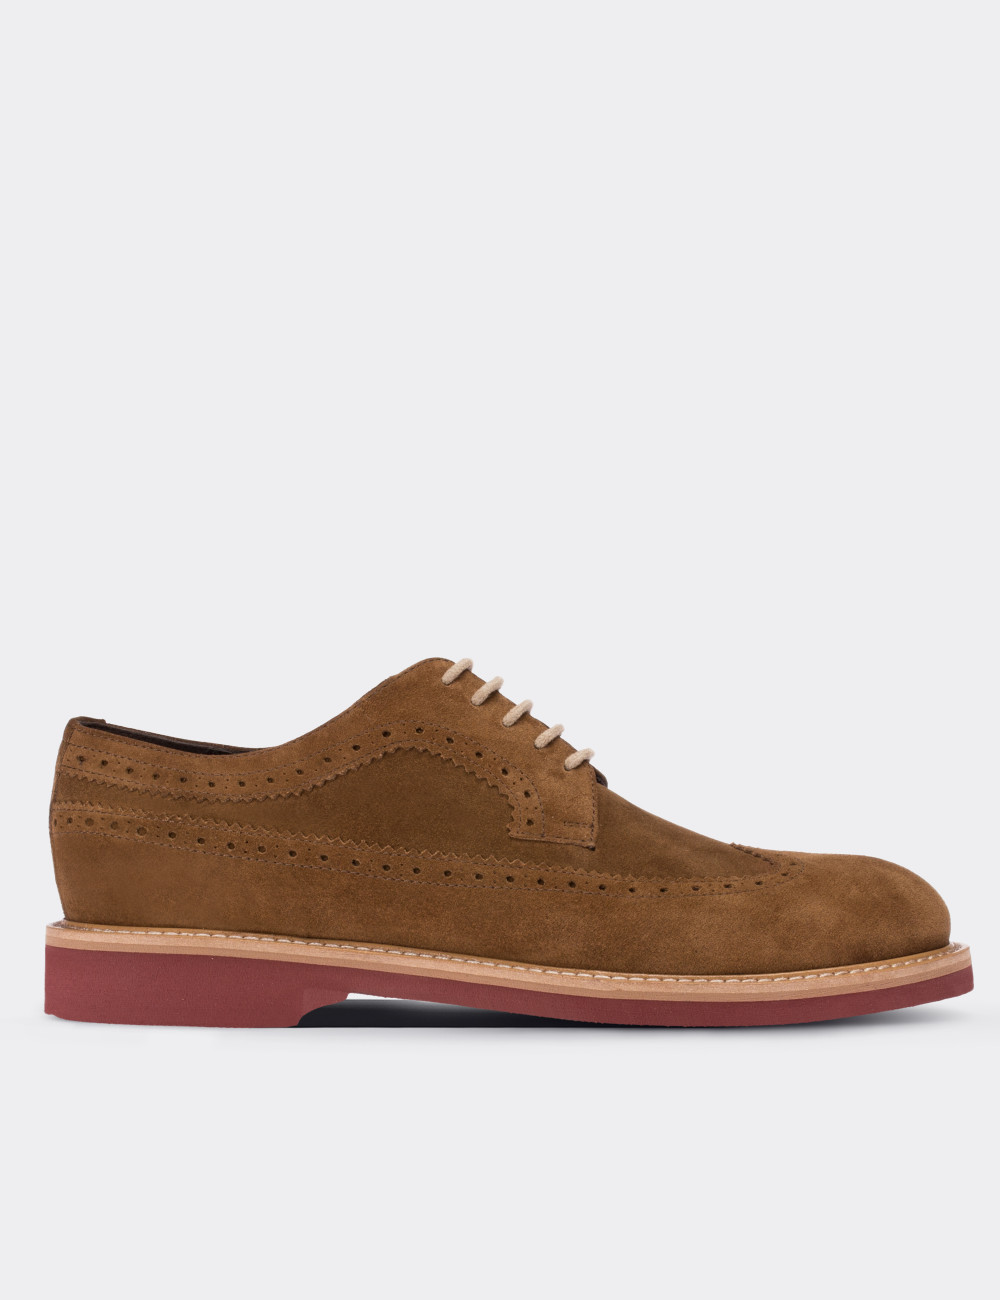 Tan Suede Leather Lace-up Shoes - 01293MTBAE09